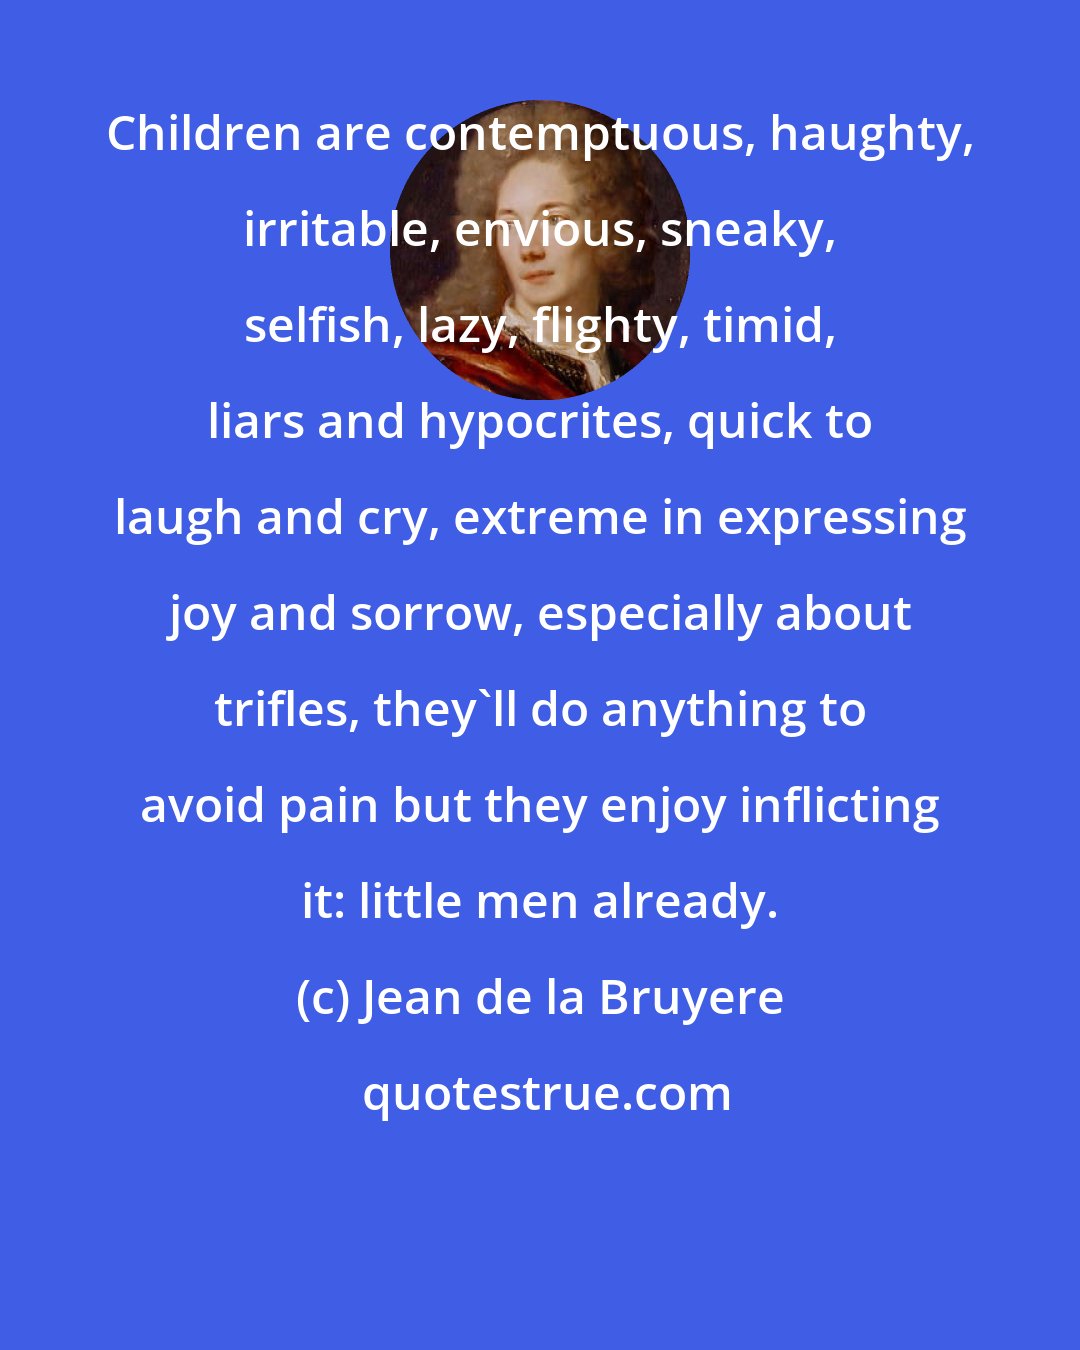 Jean de la Bruyere: Children are contemptuous, haughty, irritable, envious, sneaky, selfish, lazy, flighty, timid, liars and hypocrites, quick to laugh and cry, extreme in expressing joy and sorrow, especially about trifles, they'll do anything to avoid pain but they enjoy inflicting it: little men already.